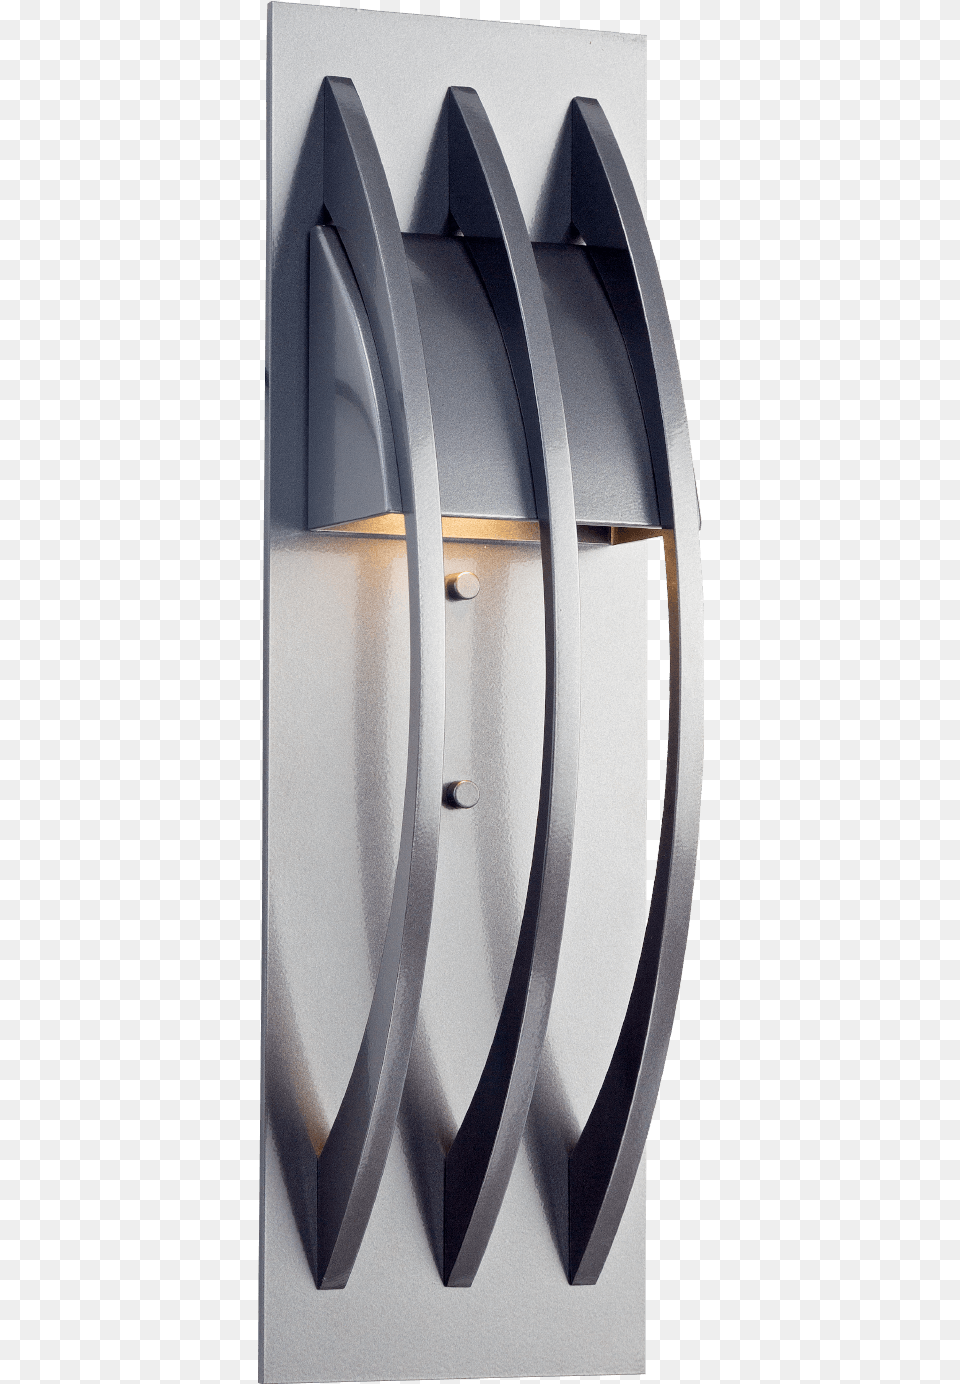 Surfing, Blade, Dagger, Knife, Weapon Png Image